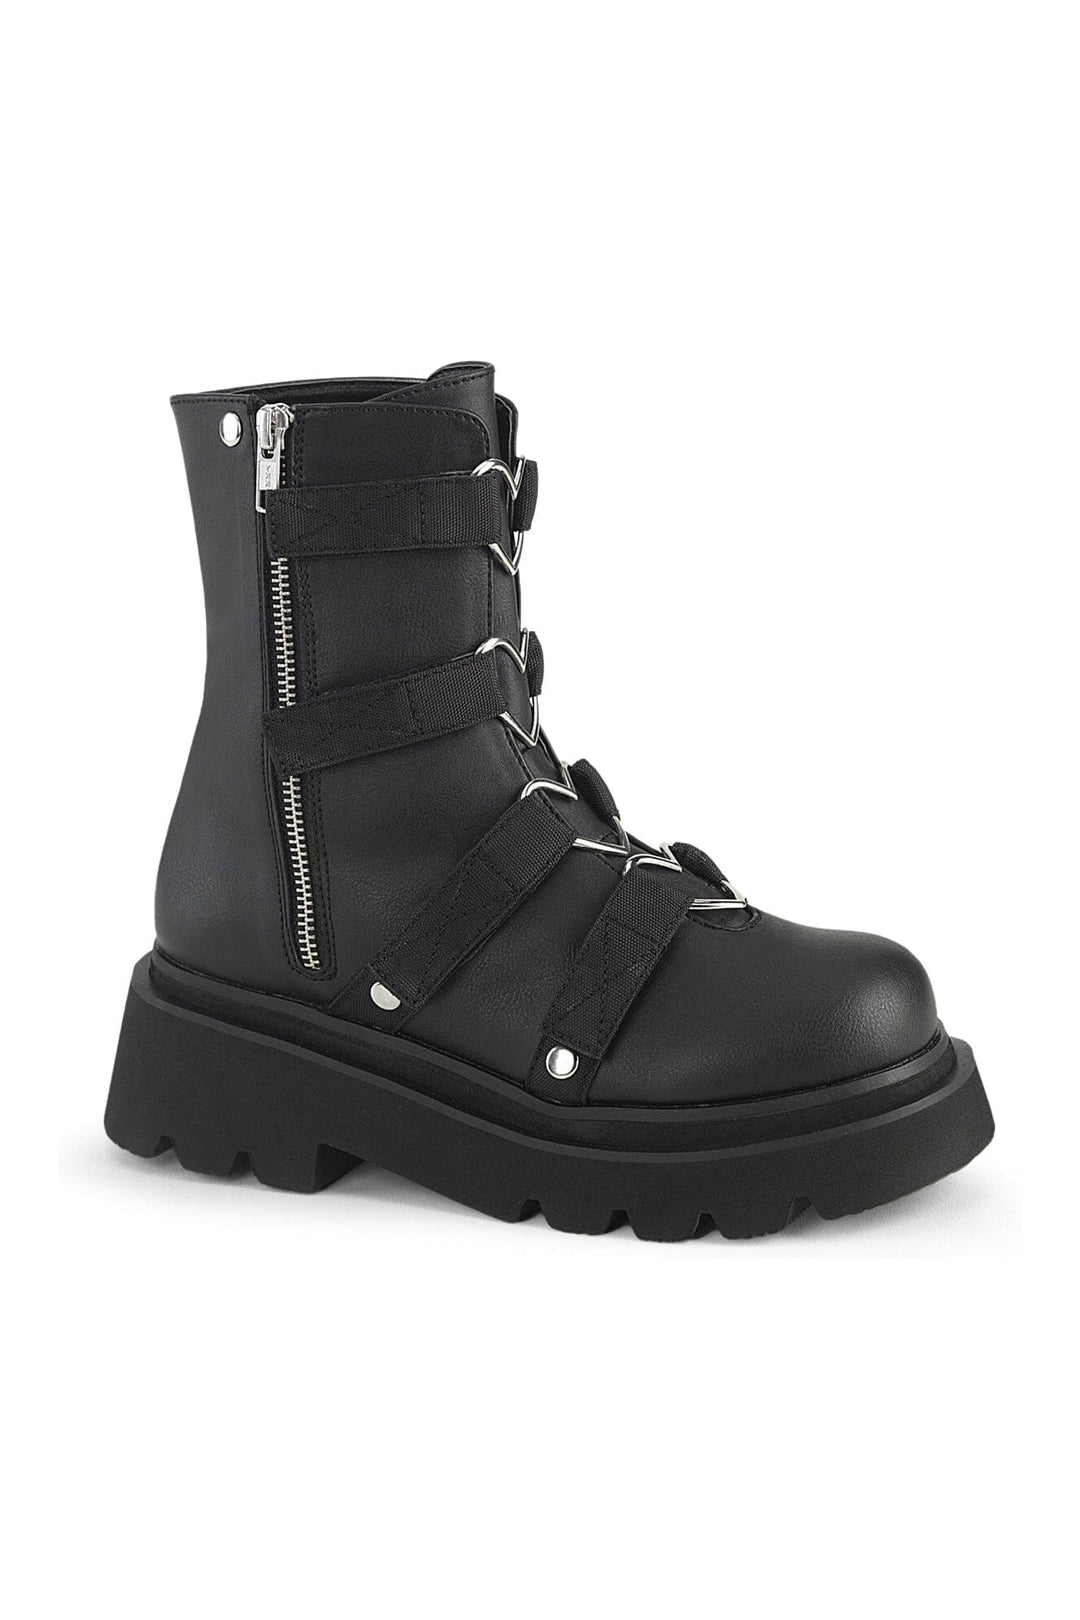 RENEGADE-50 Black Vegan Leather Ankle Boot-Ankle Boots-Demonia-Black-10-Vegan Leather-SEXYSHOES.COM